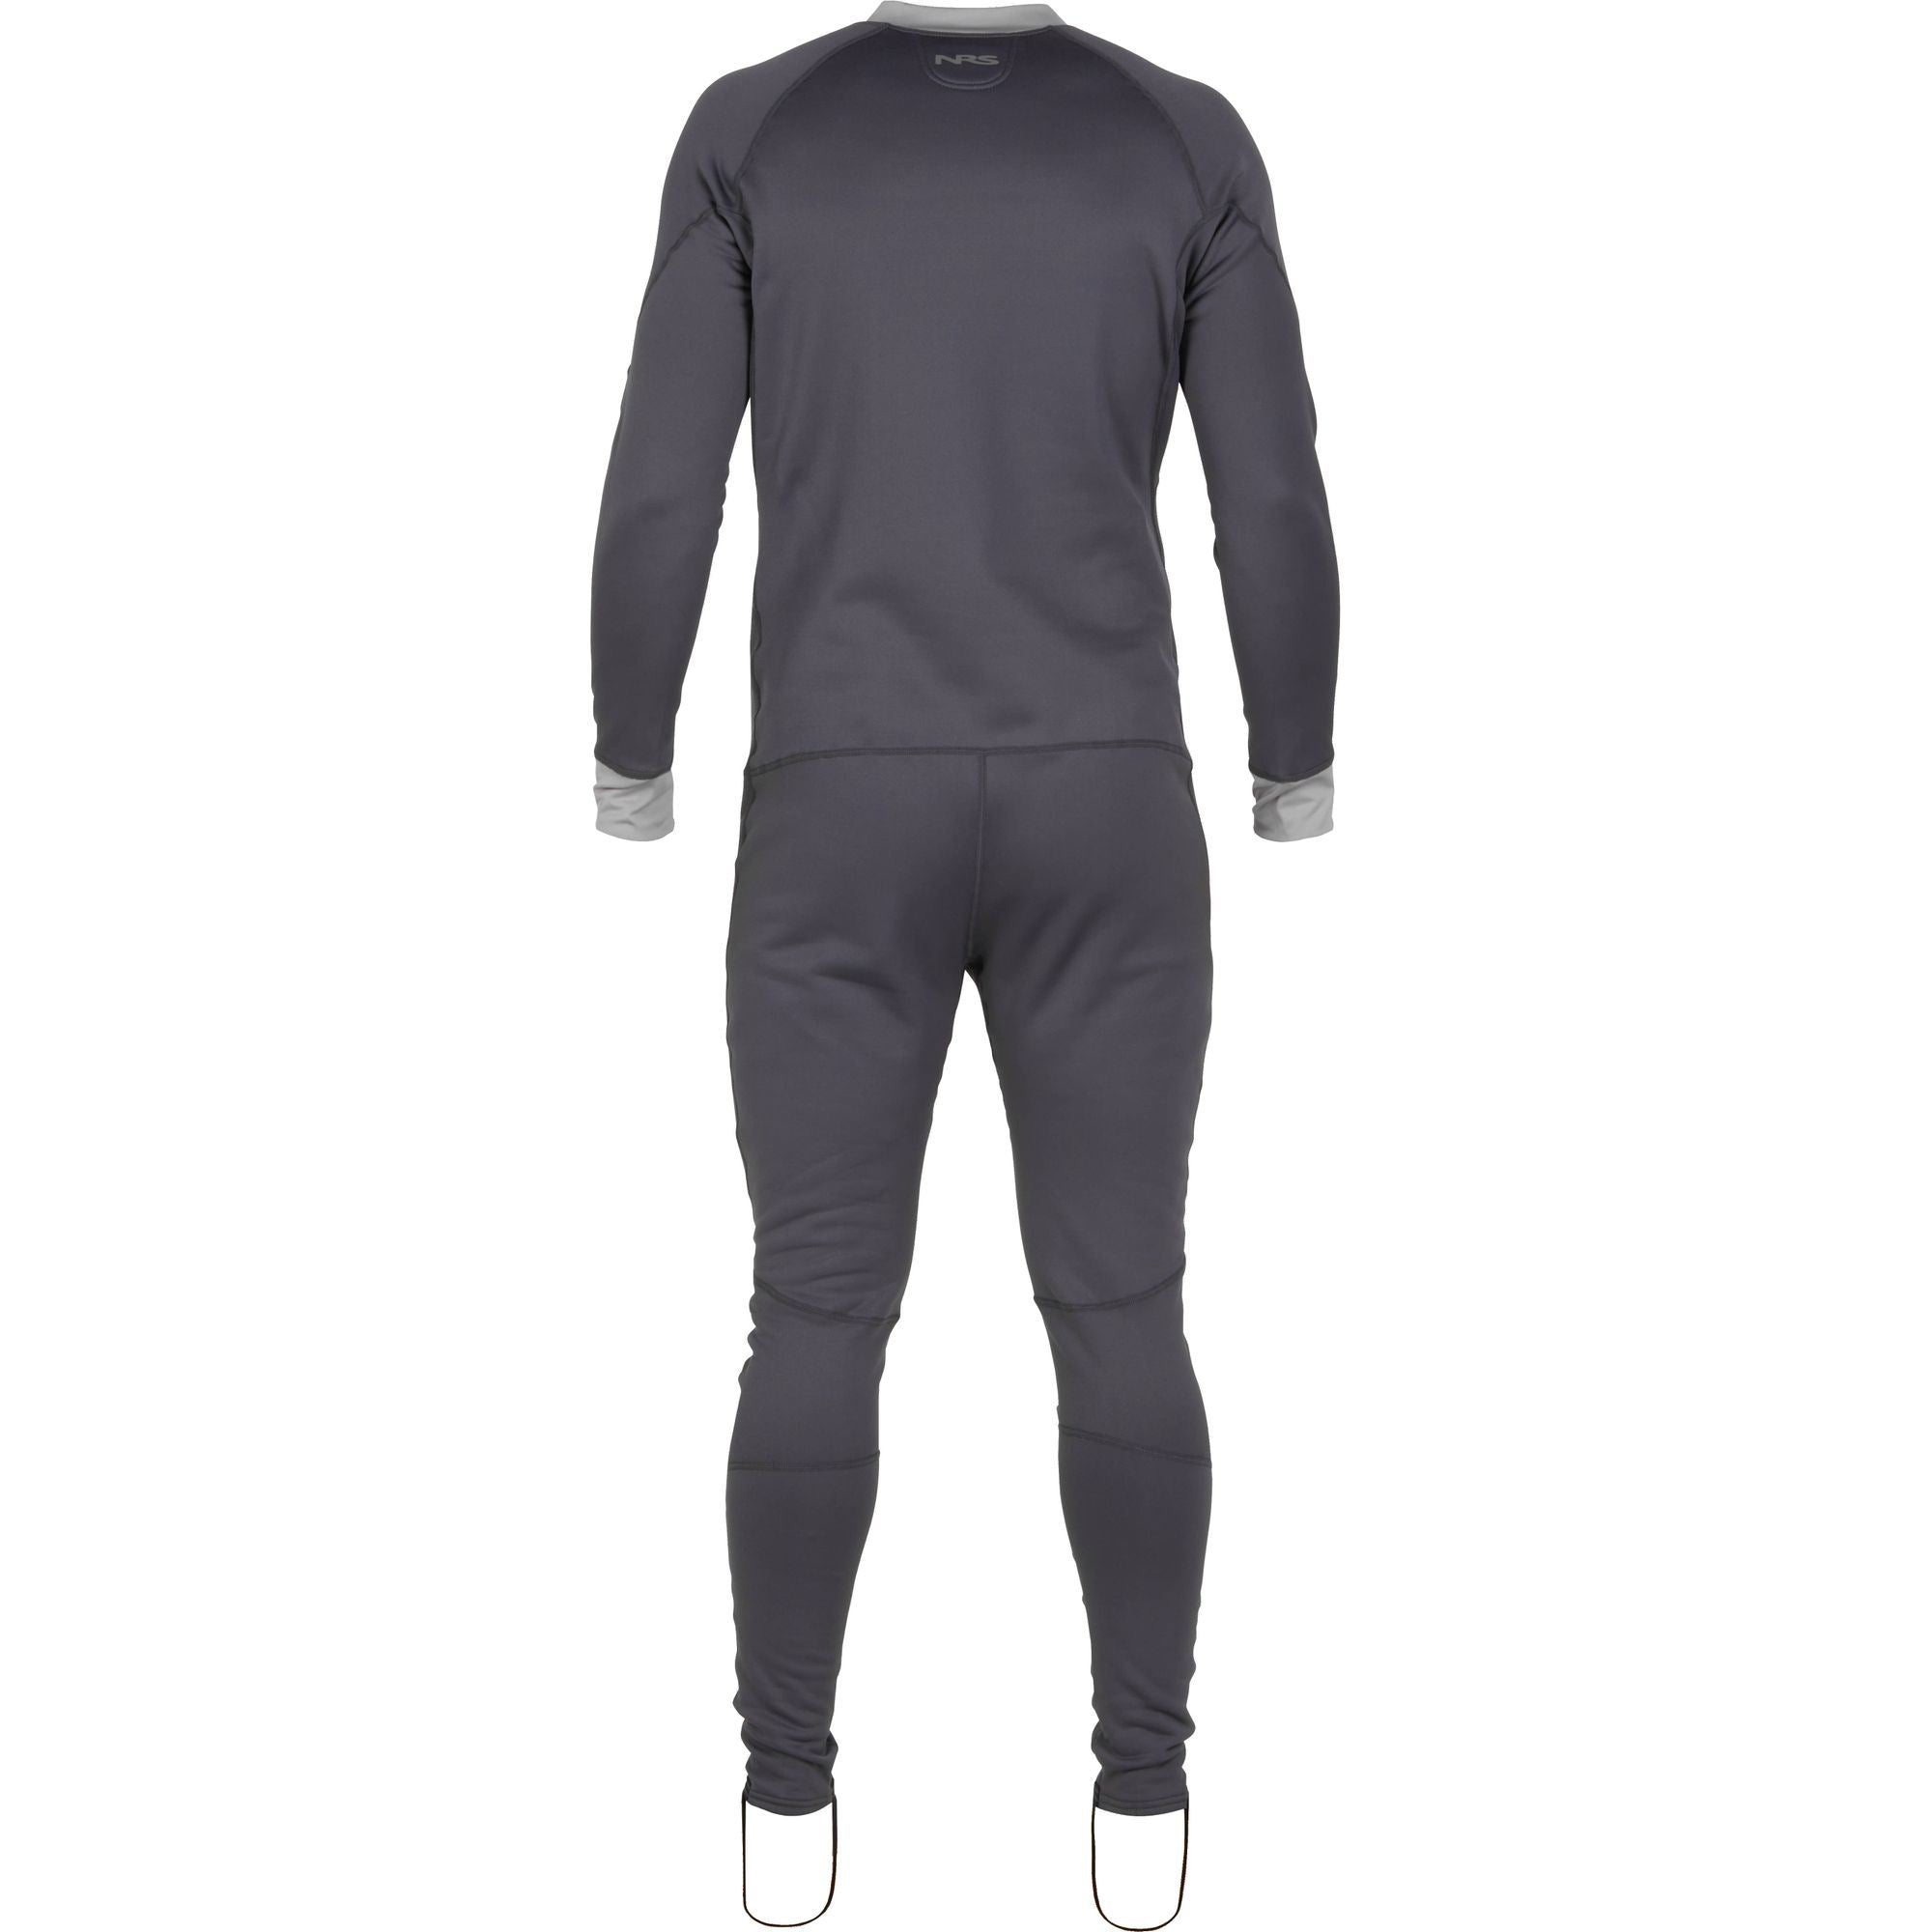 NRS Expedition Weight Union Suit, Miesten